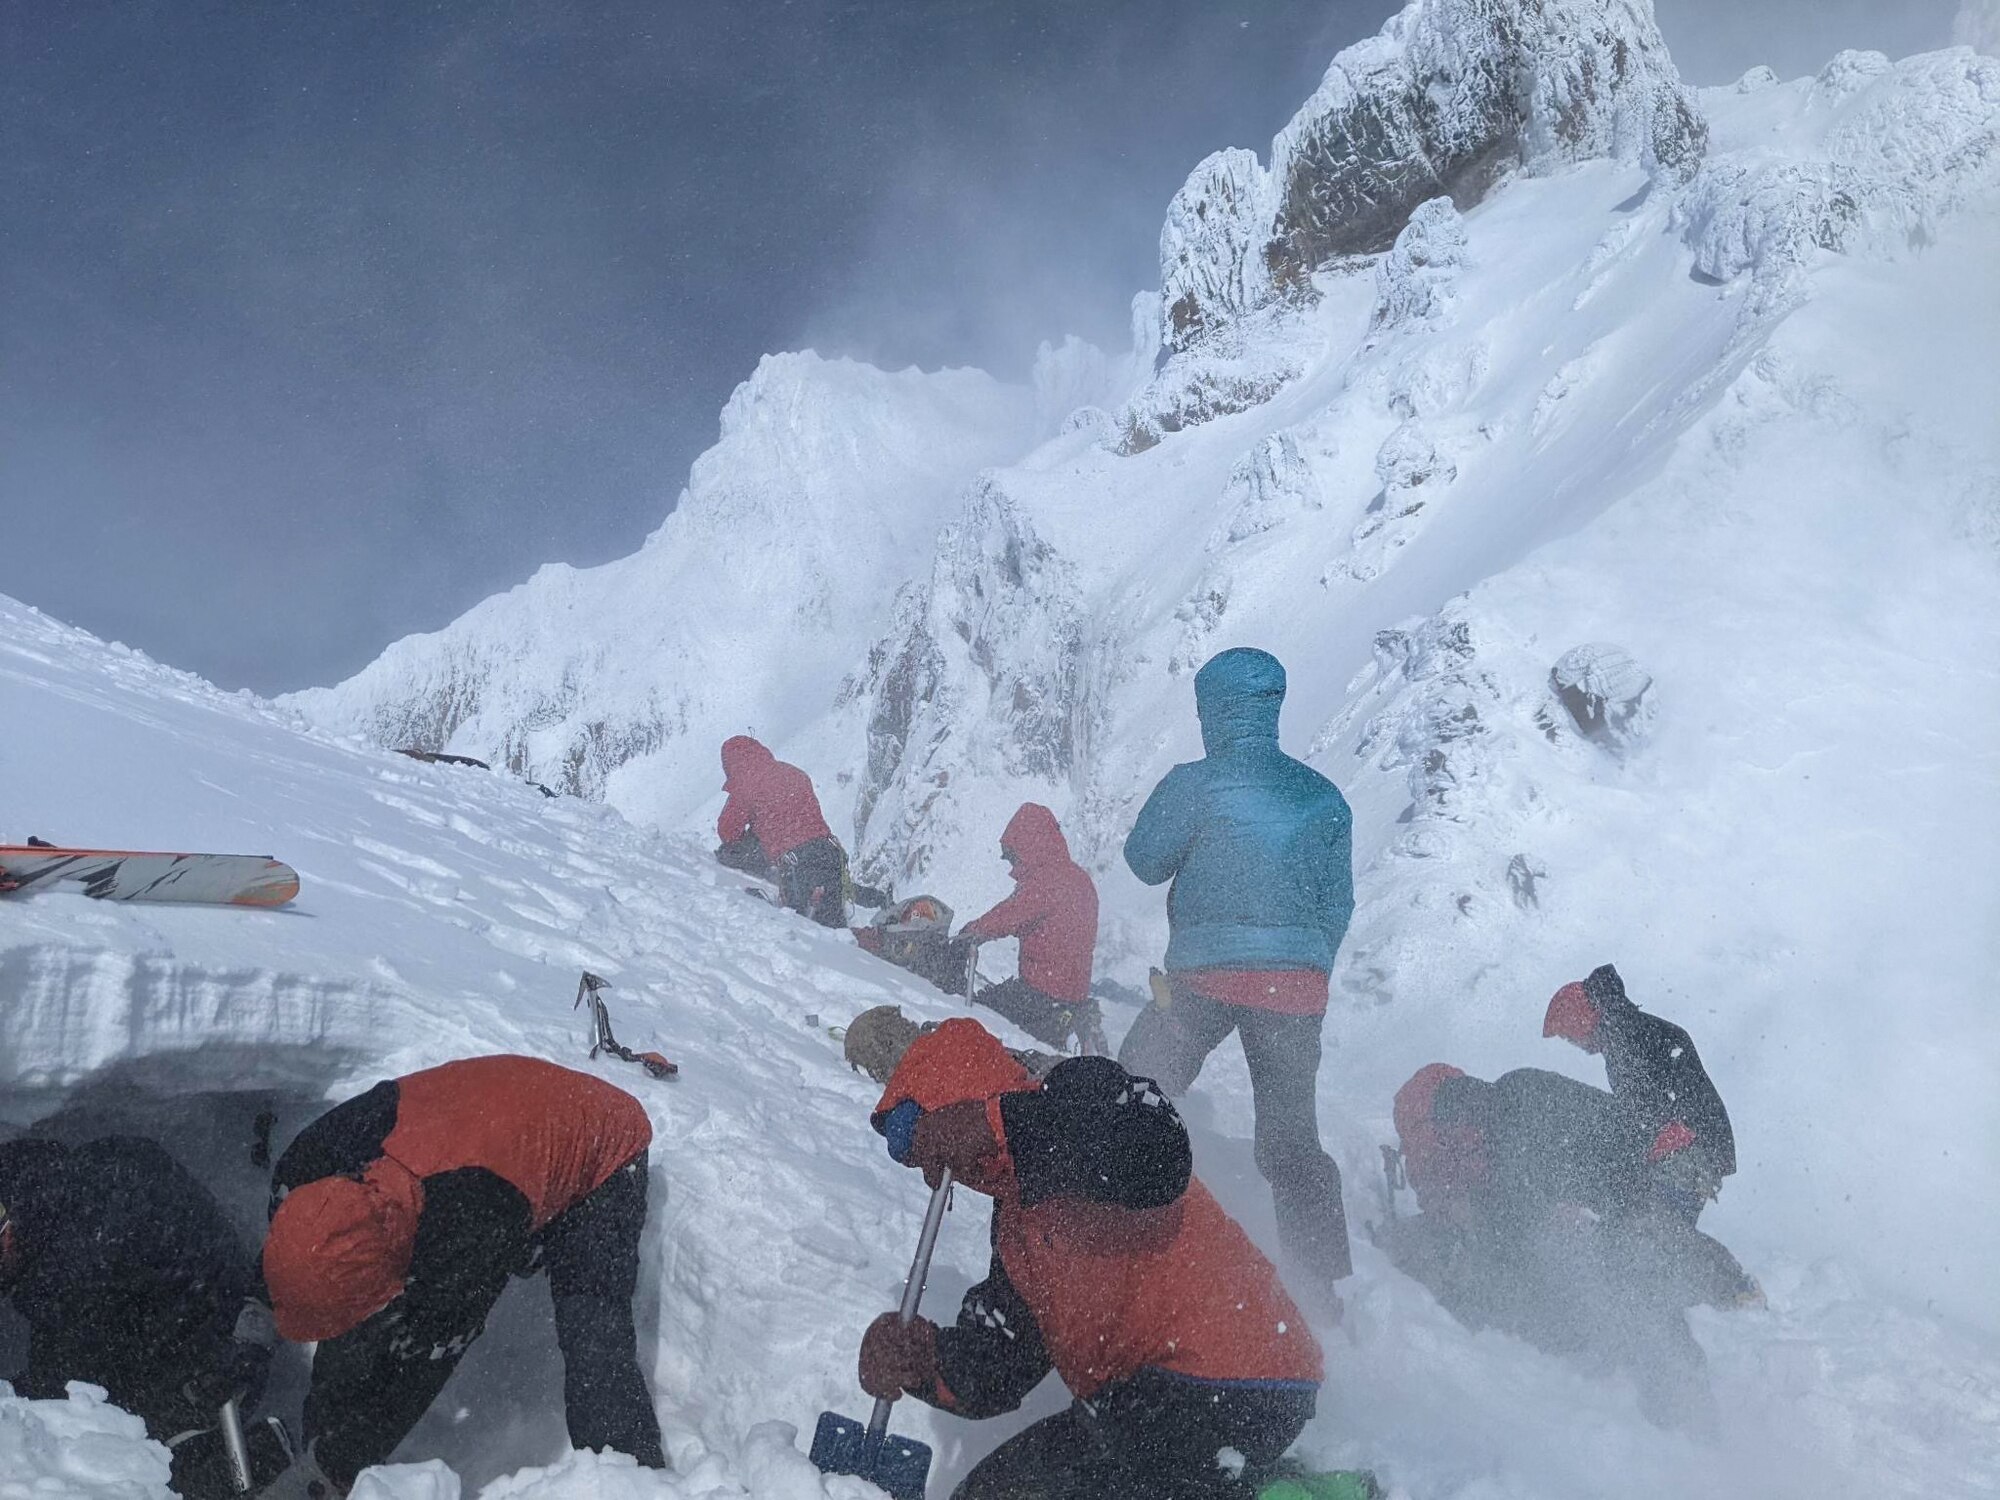 The 304th Rescue Squadron participates in a multi-team search-and-rescue mission in challenging conditions after two limbers fell approximately 200 feet in the Leuthold Couloir area of Mt. Hood. The 304th RQS trains and equips combat rescue officers, pararescue Airmen, and support personnel to plan, lead, and conduct military rescue operations.